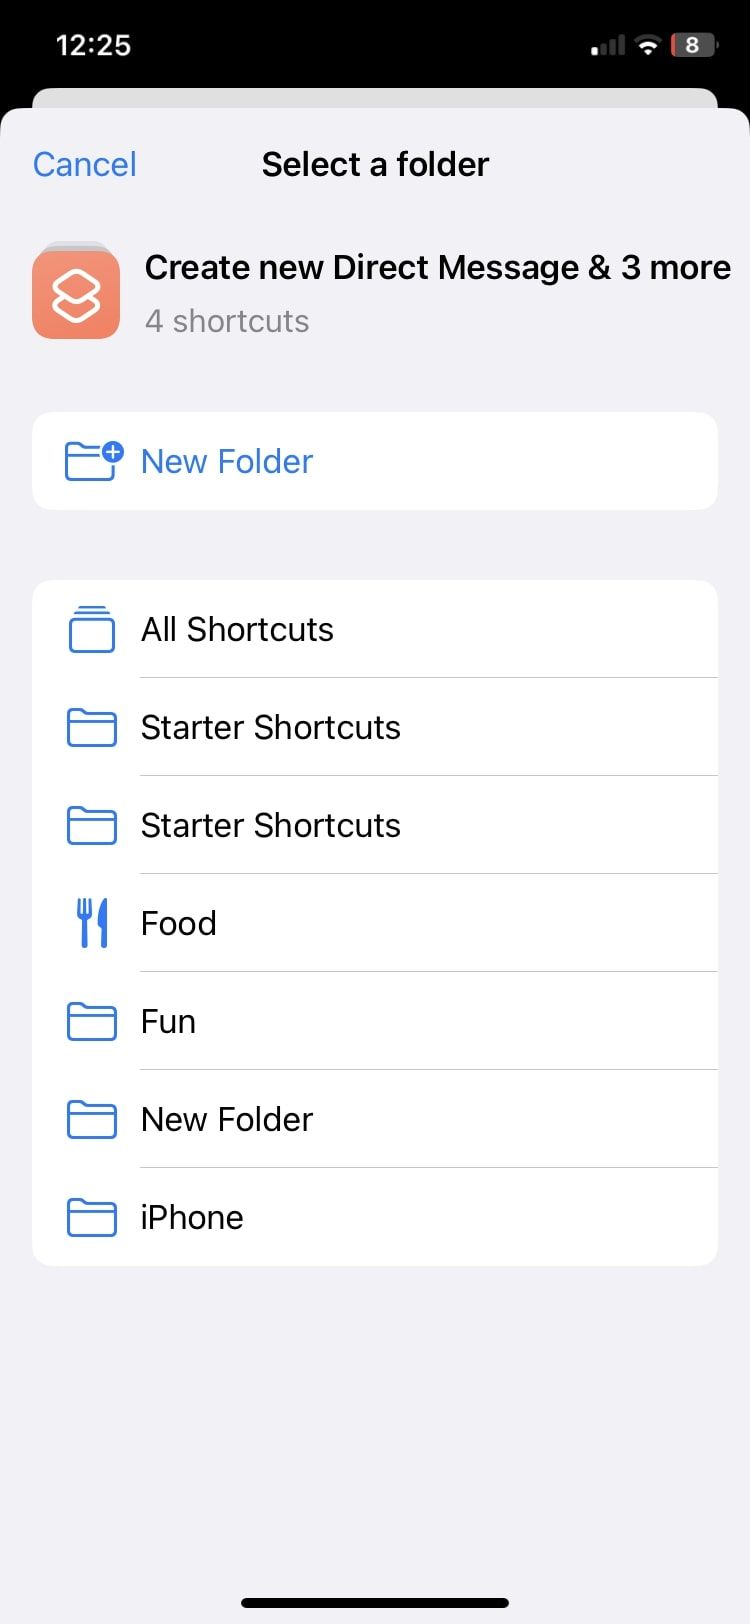 select folder in the Shortcuts app